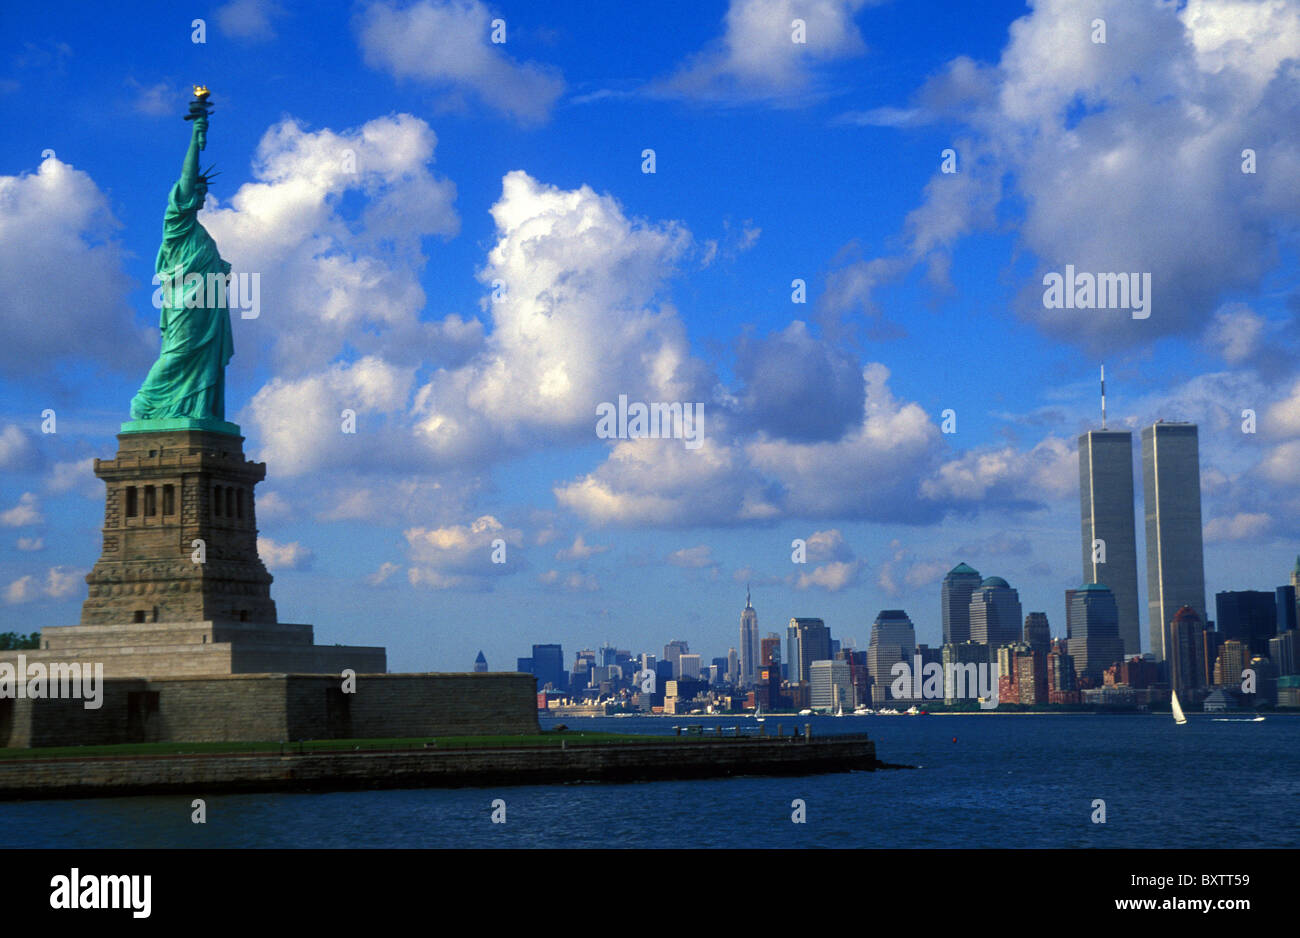 Statue of Liberty with the twin towers of the World Trade Centre in the distance, New York City, USA Stock Photo